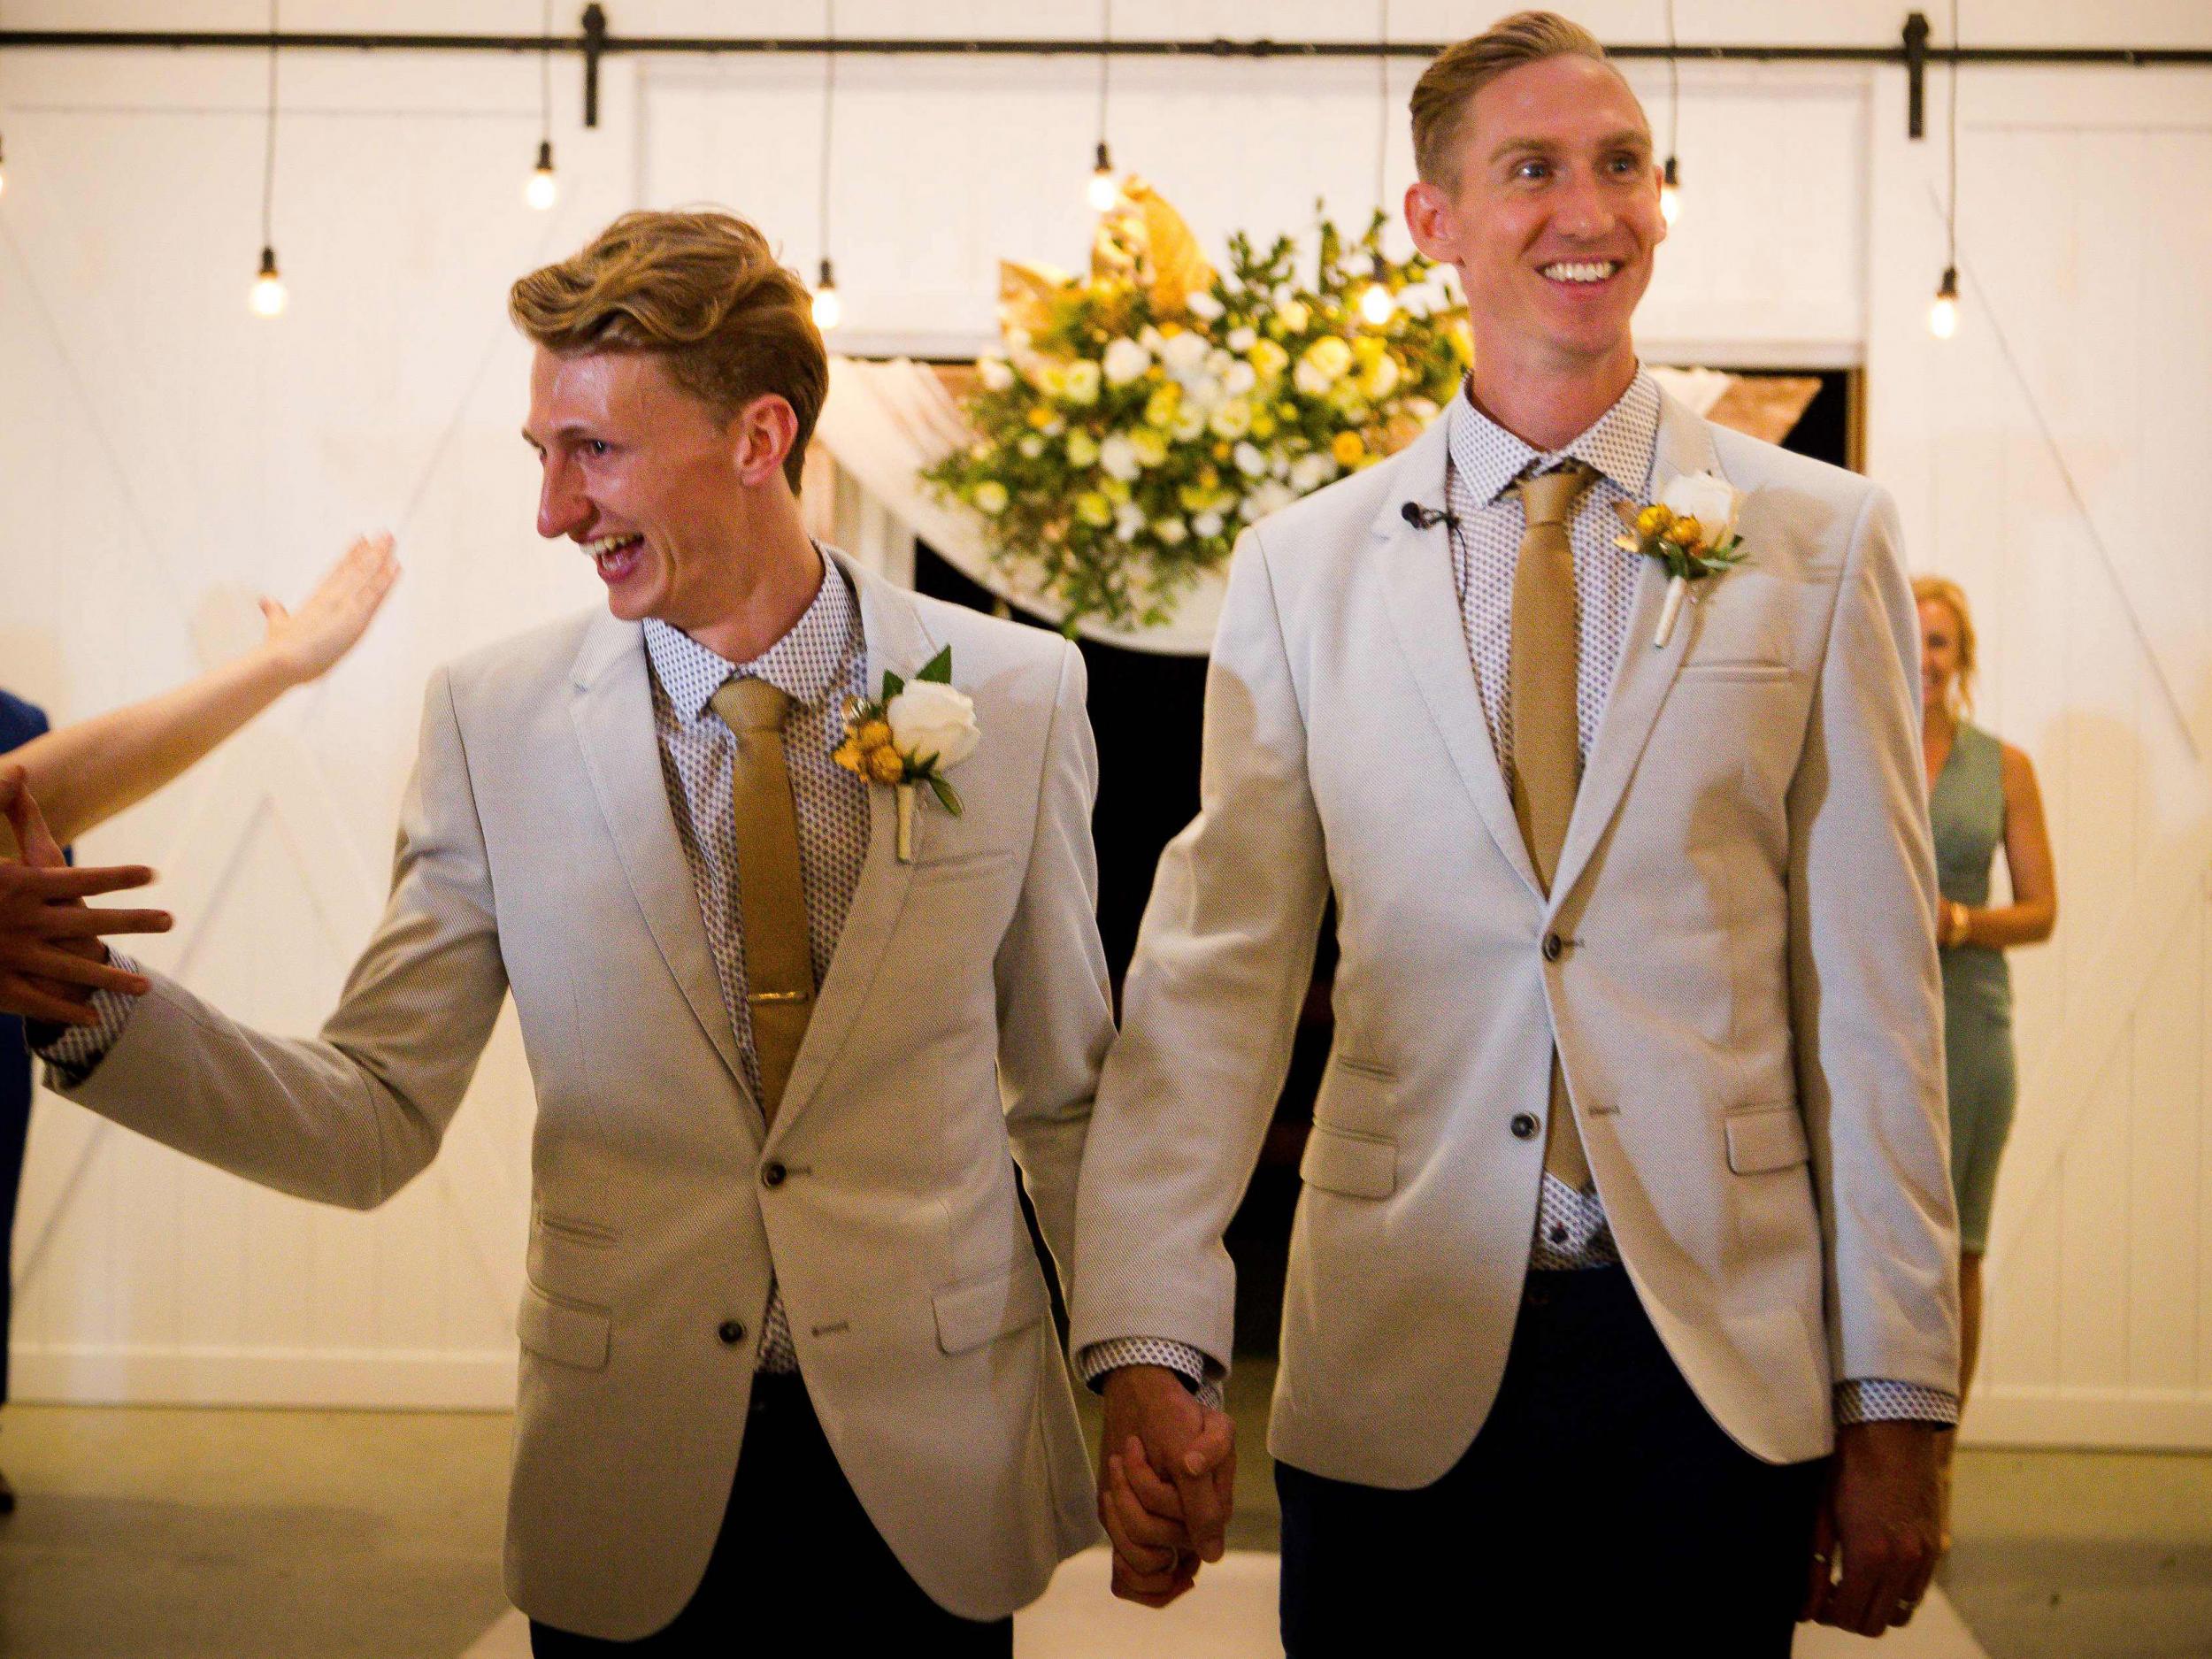 Australian Commonwealth Games sprinter Craig Burns (right) and fiance Luke Sullivan are congratulated by friends after exchanging vows at their marriage ceremony at Summergrove Estate, New South Wales